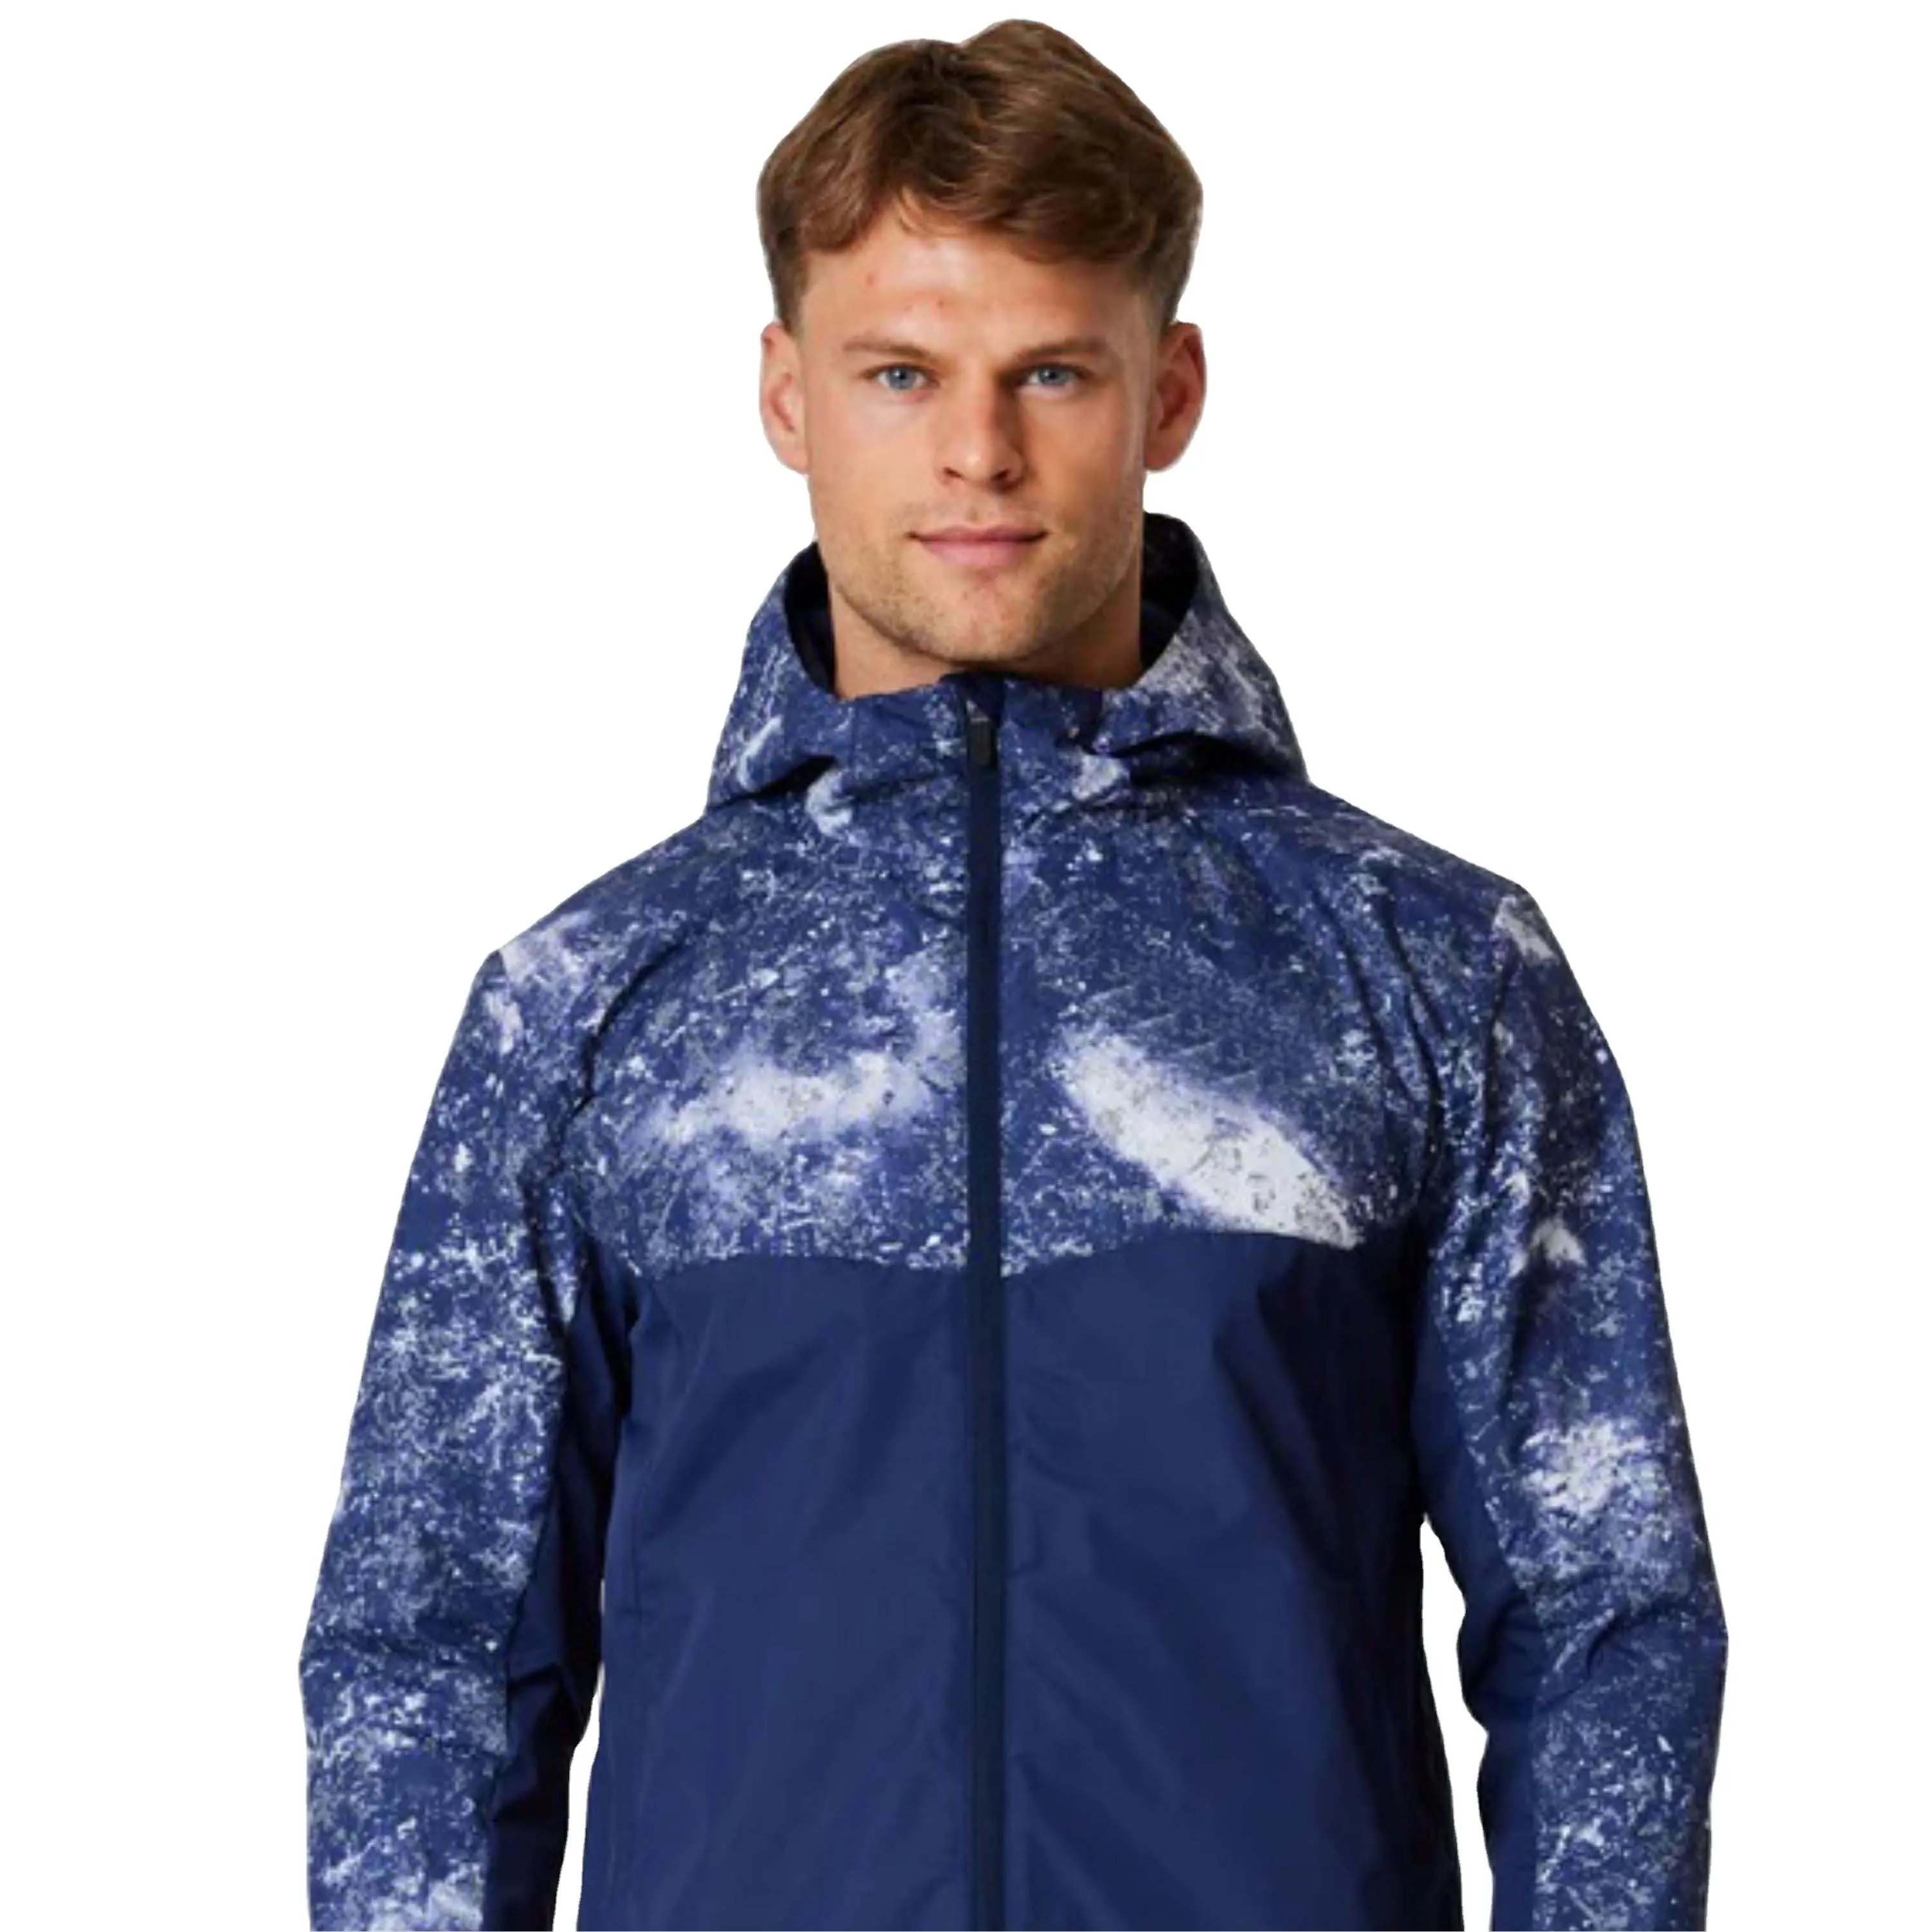 Premium Reflective Windbreaker for Enhanced Visibility - Waterproof and Windproof Jacket for Running, Hiking, and Biking